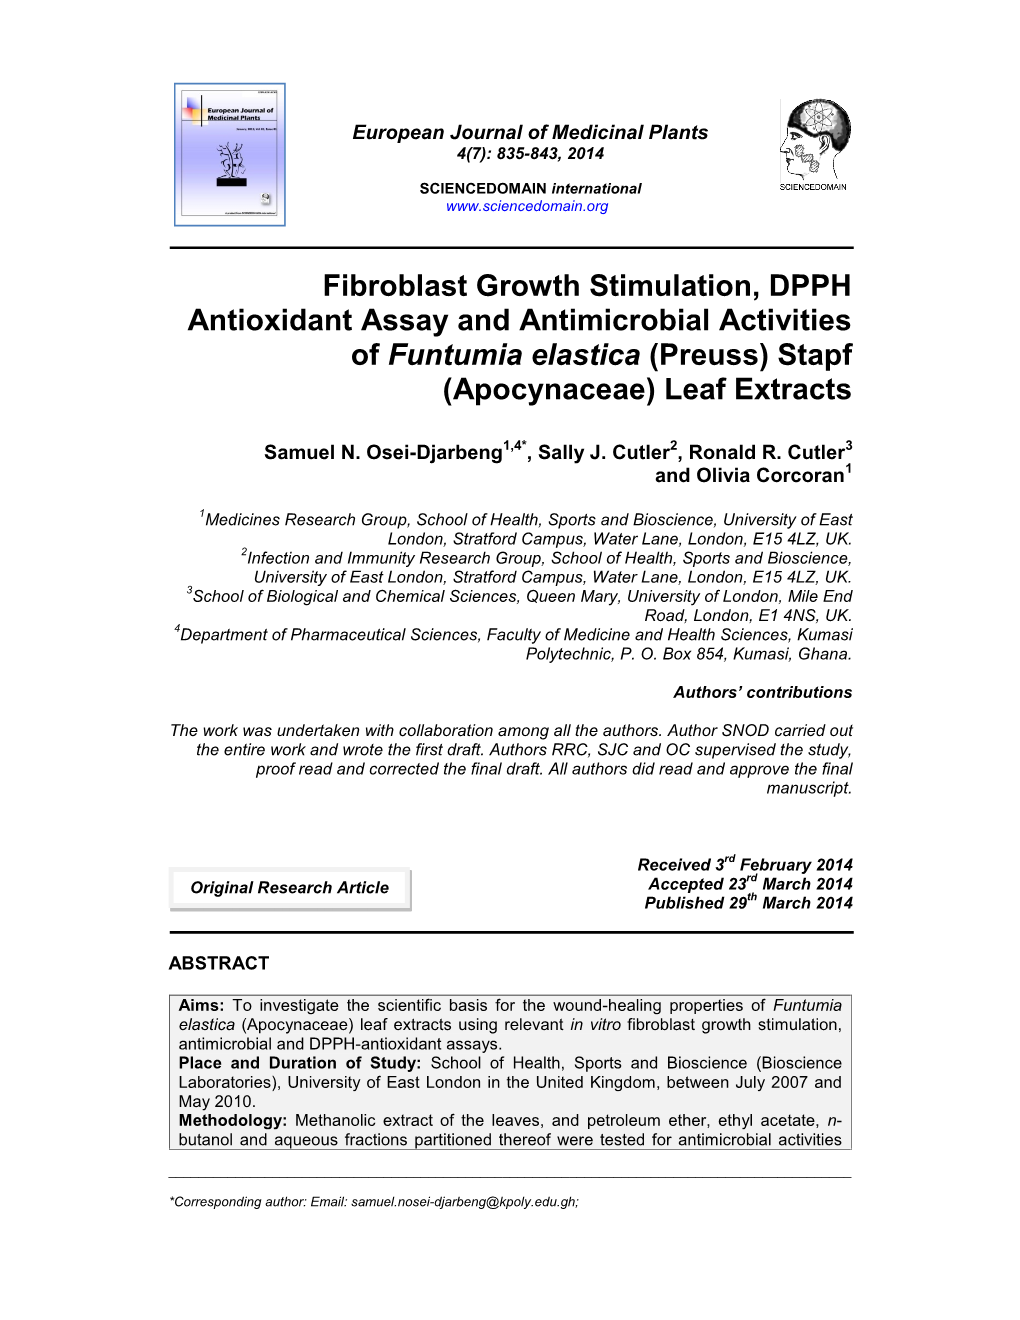 Fibroblast Growth Stimulation, DPPH Antioxidant Assay and Antimicrobial Activities of Funtumia Elastica (Preuss) Stapf (Apocynaceae) Leaf Extracts